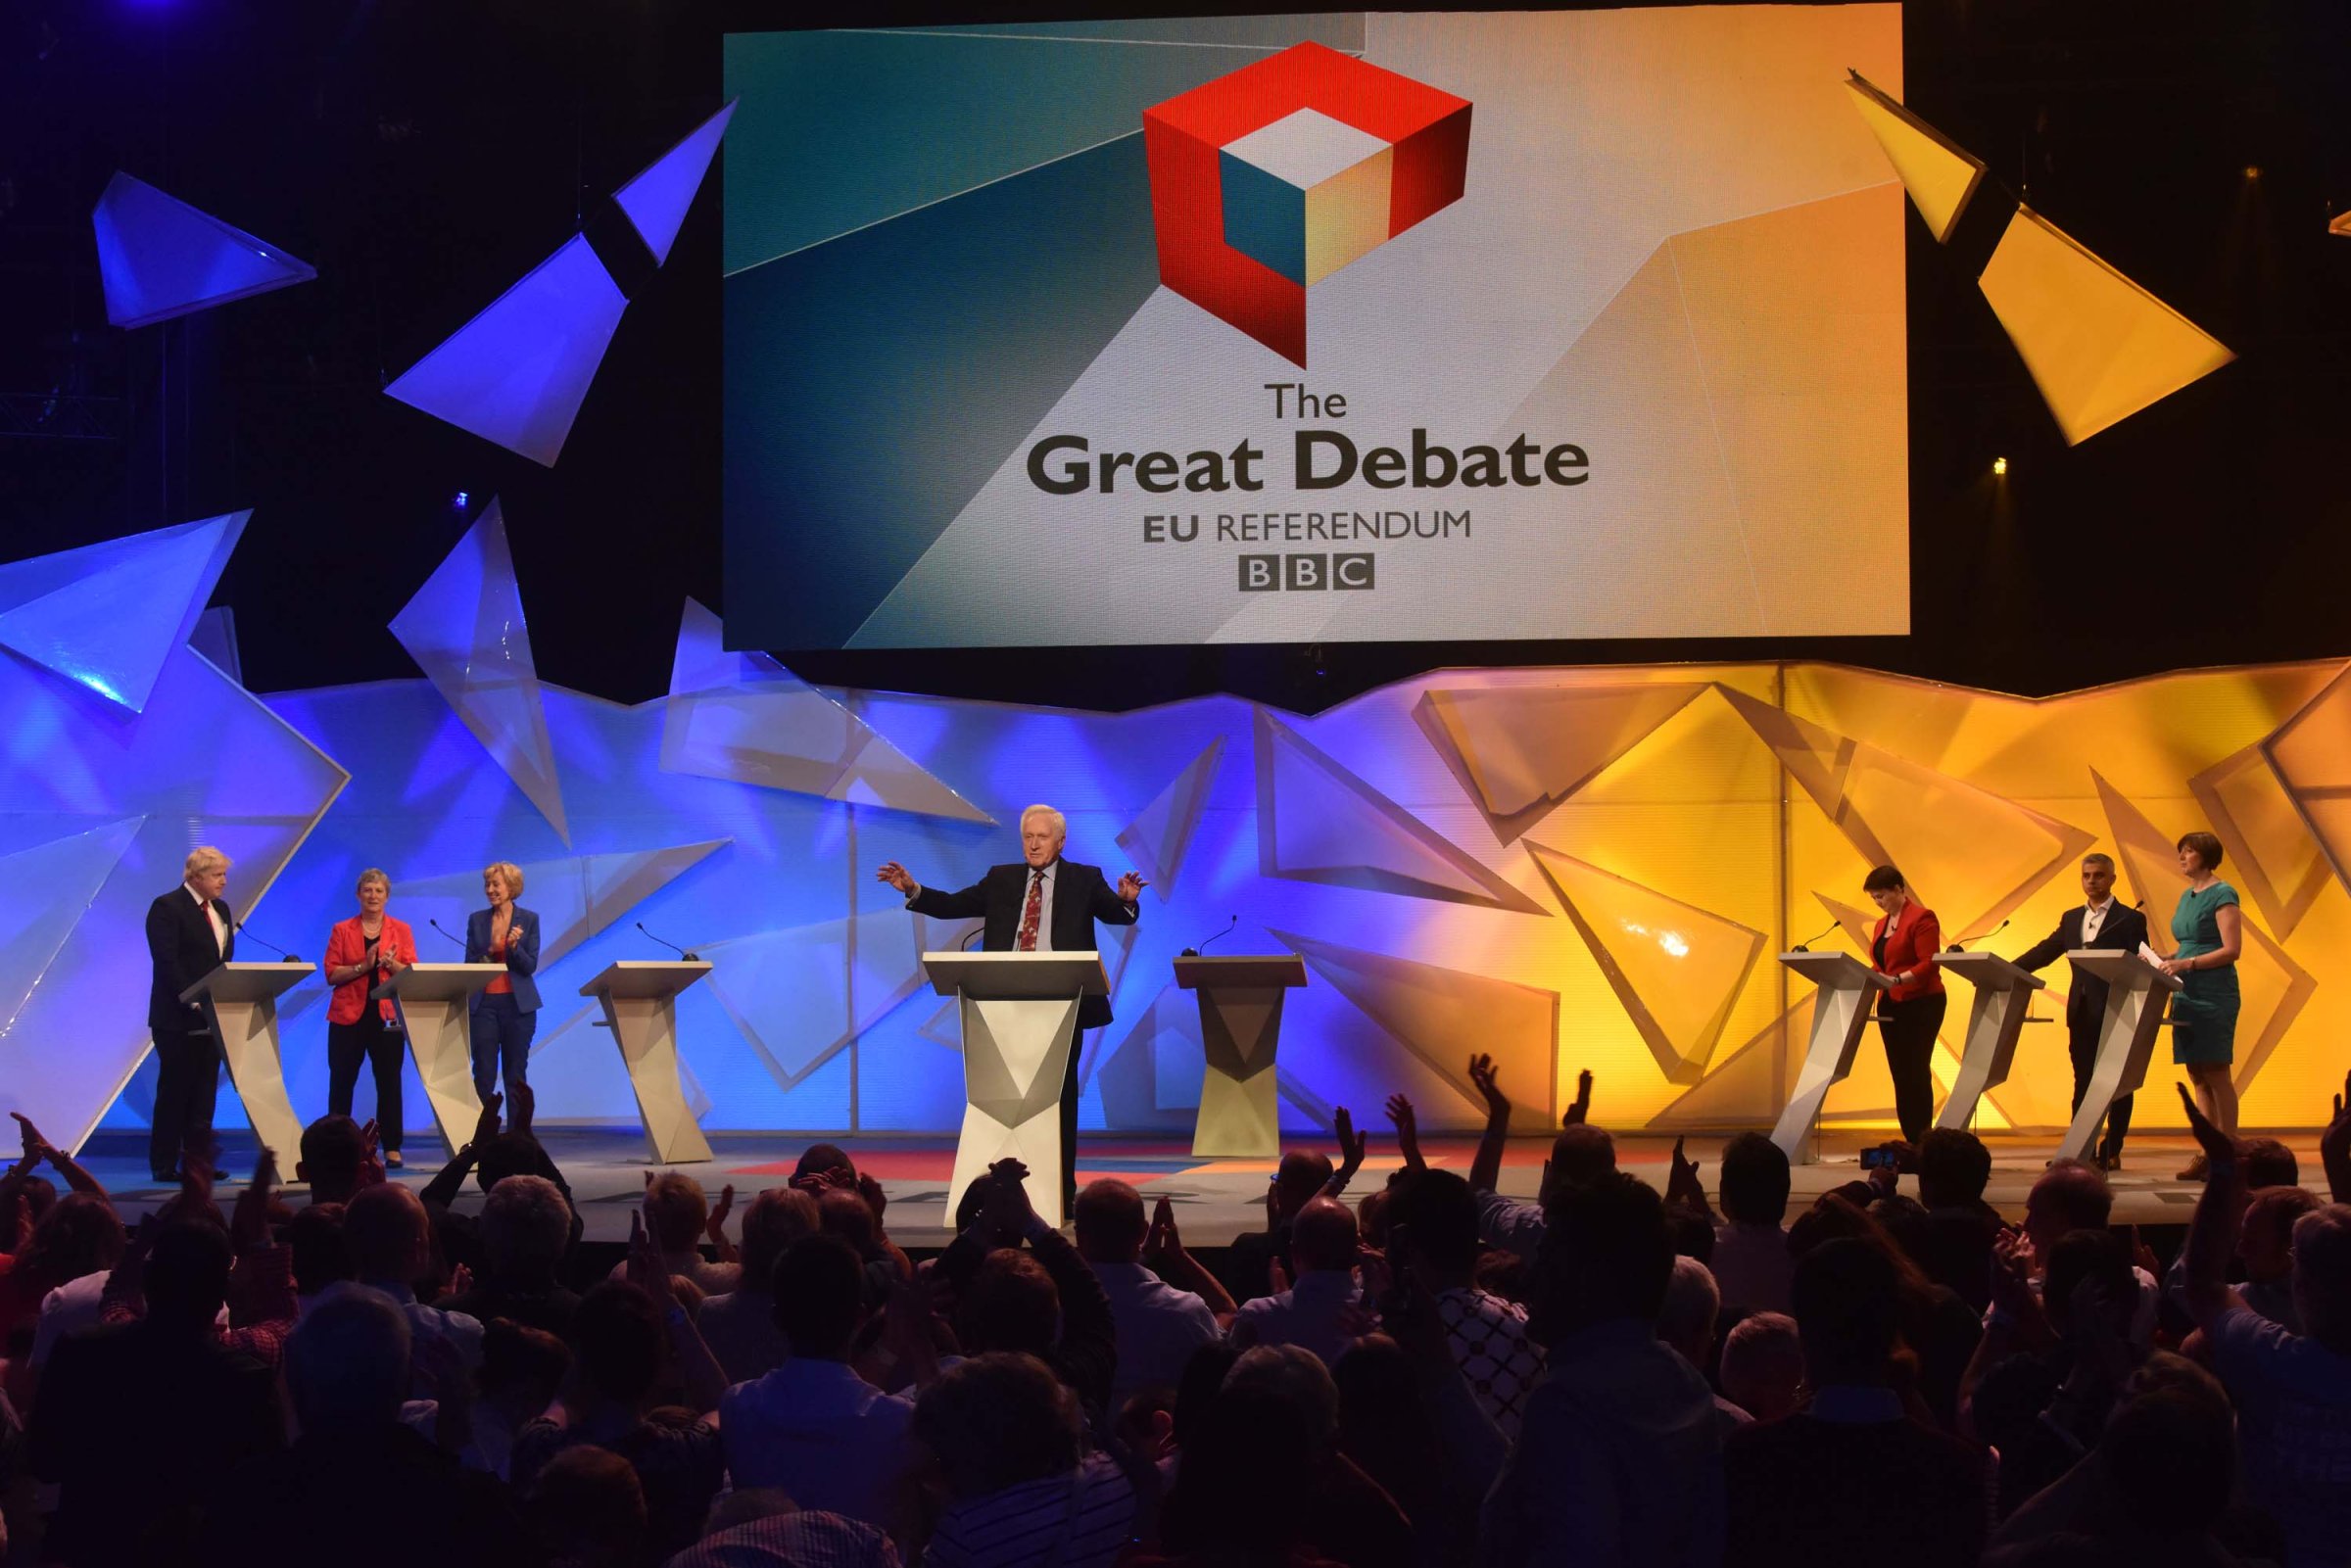 In this handout image provided by the BBC, Boris Johnson, Gisela Stuart, Energy Minister Andrea Leadsom, David Dimbleby (C), Scottish Conservative leader Ruth Davidson, Mayor of London Sadiq Khan and TUC General Secretary Frances O'Grady take part in the EU debate at Wembley Arena on June 21, 2016 in London, England.